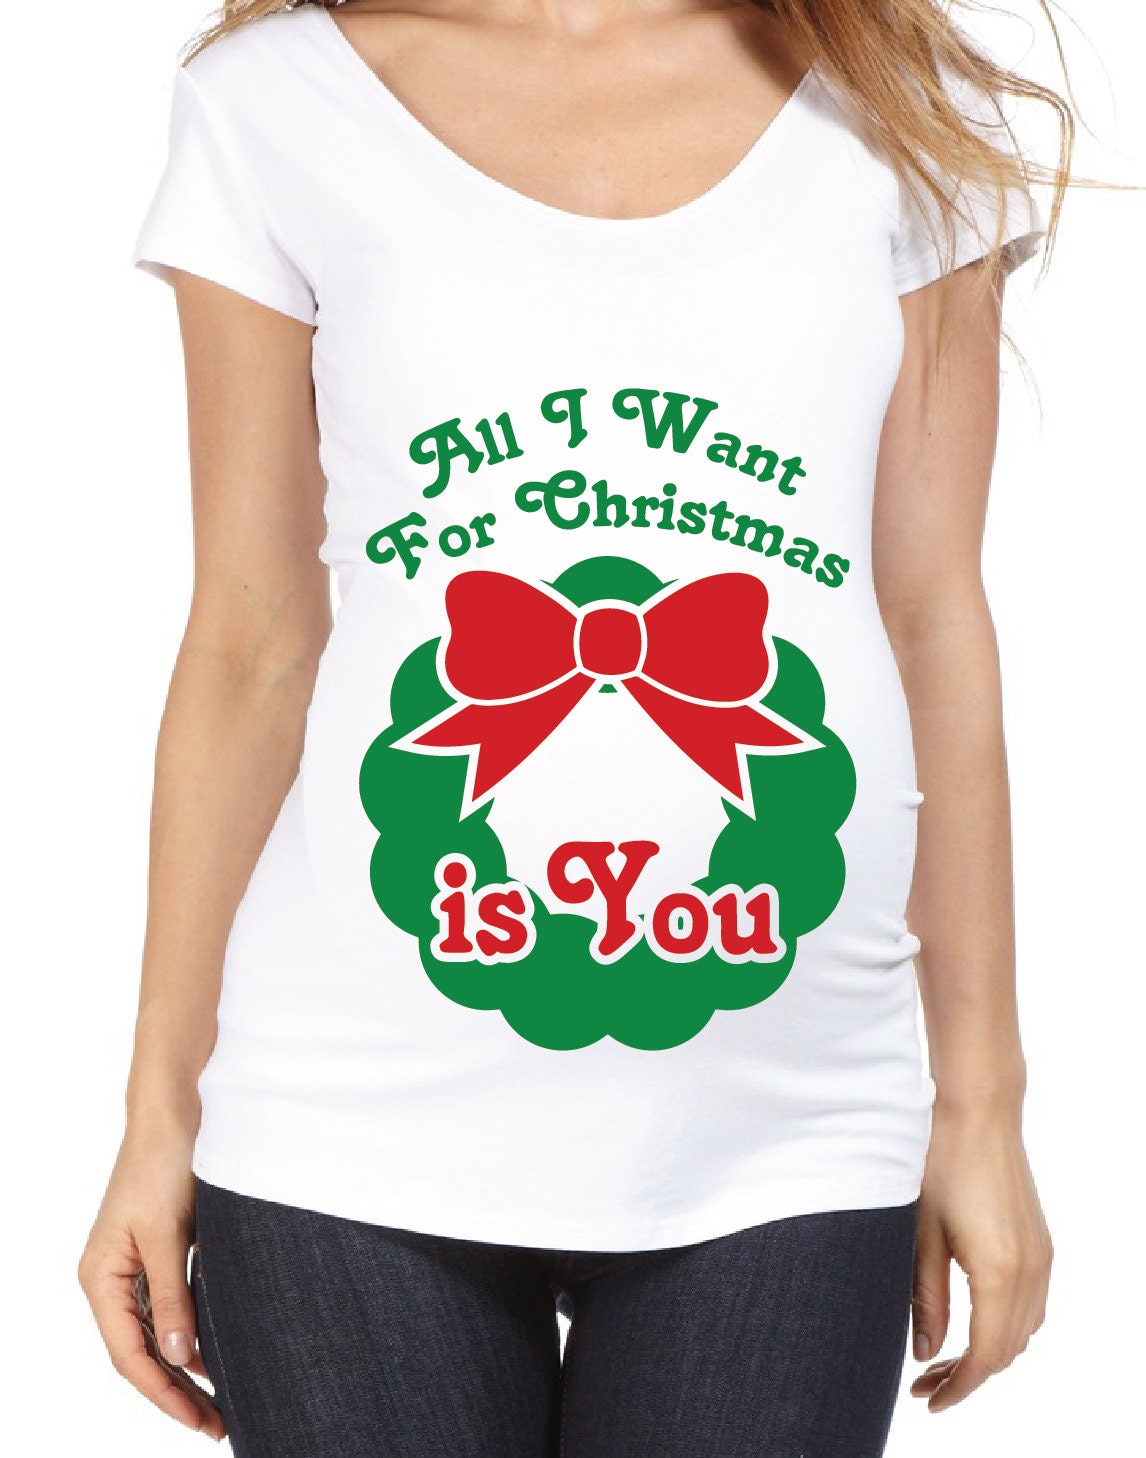 Download All I Want for Christmas Maternity Tee Shirt Design, SVG ...